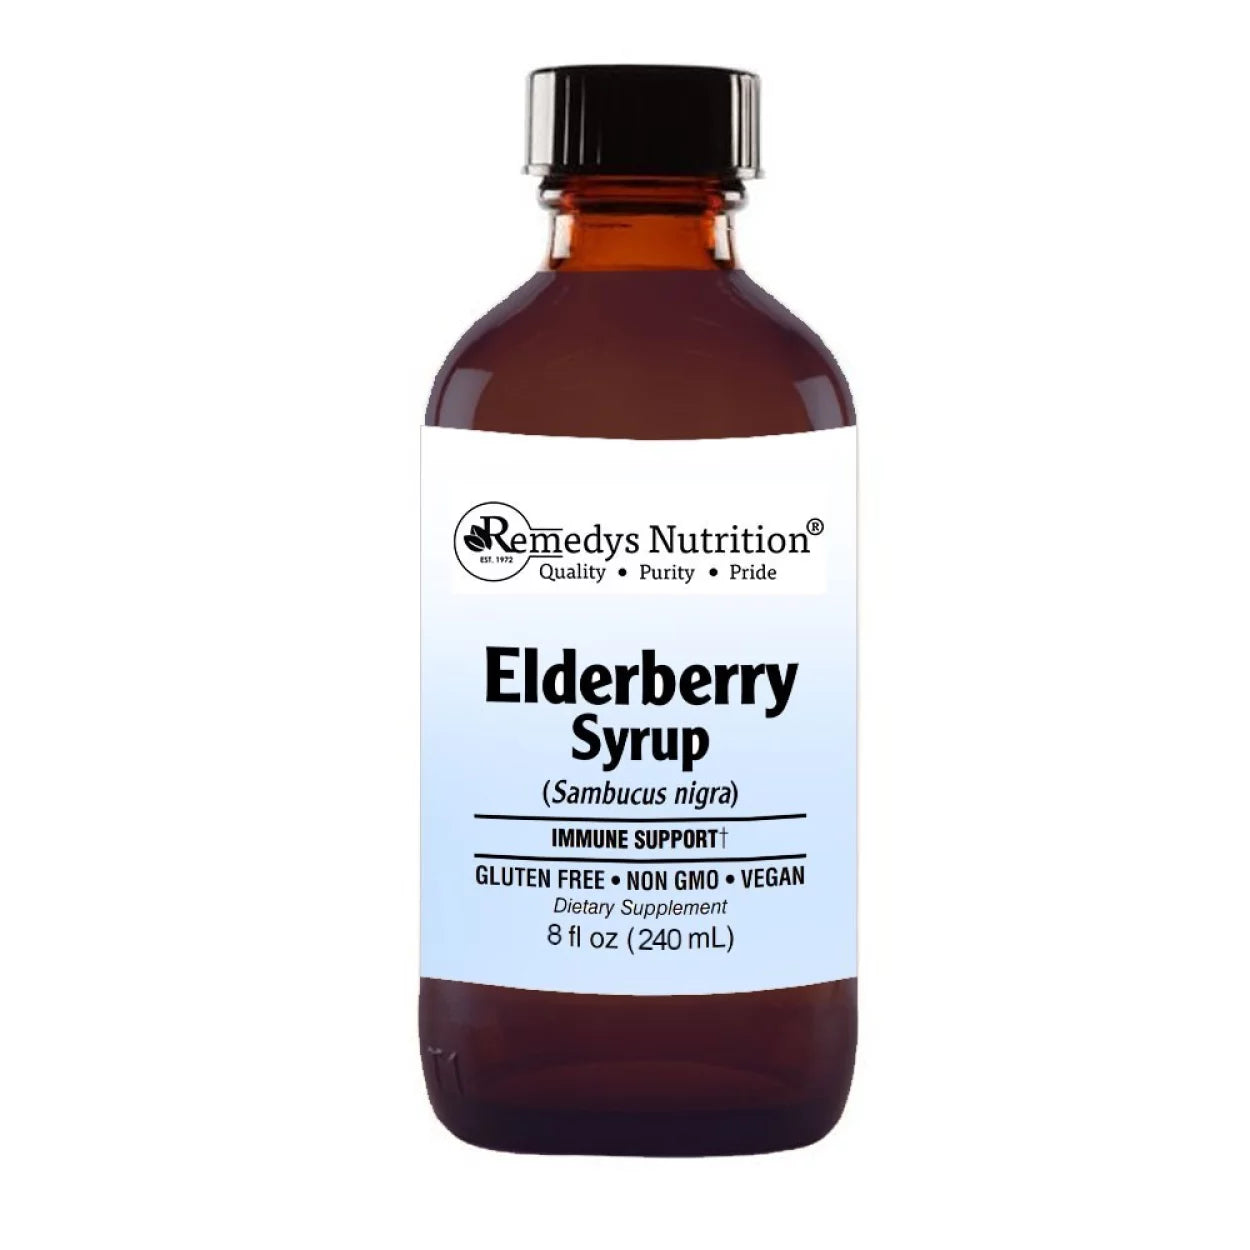 Image of Remedy's Nutrition® Elderberry Cough Syrup for Immunity and Health front bottle. Sambucus nigra. 8 oz